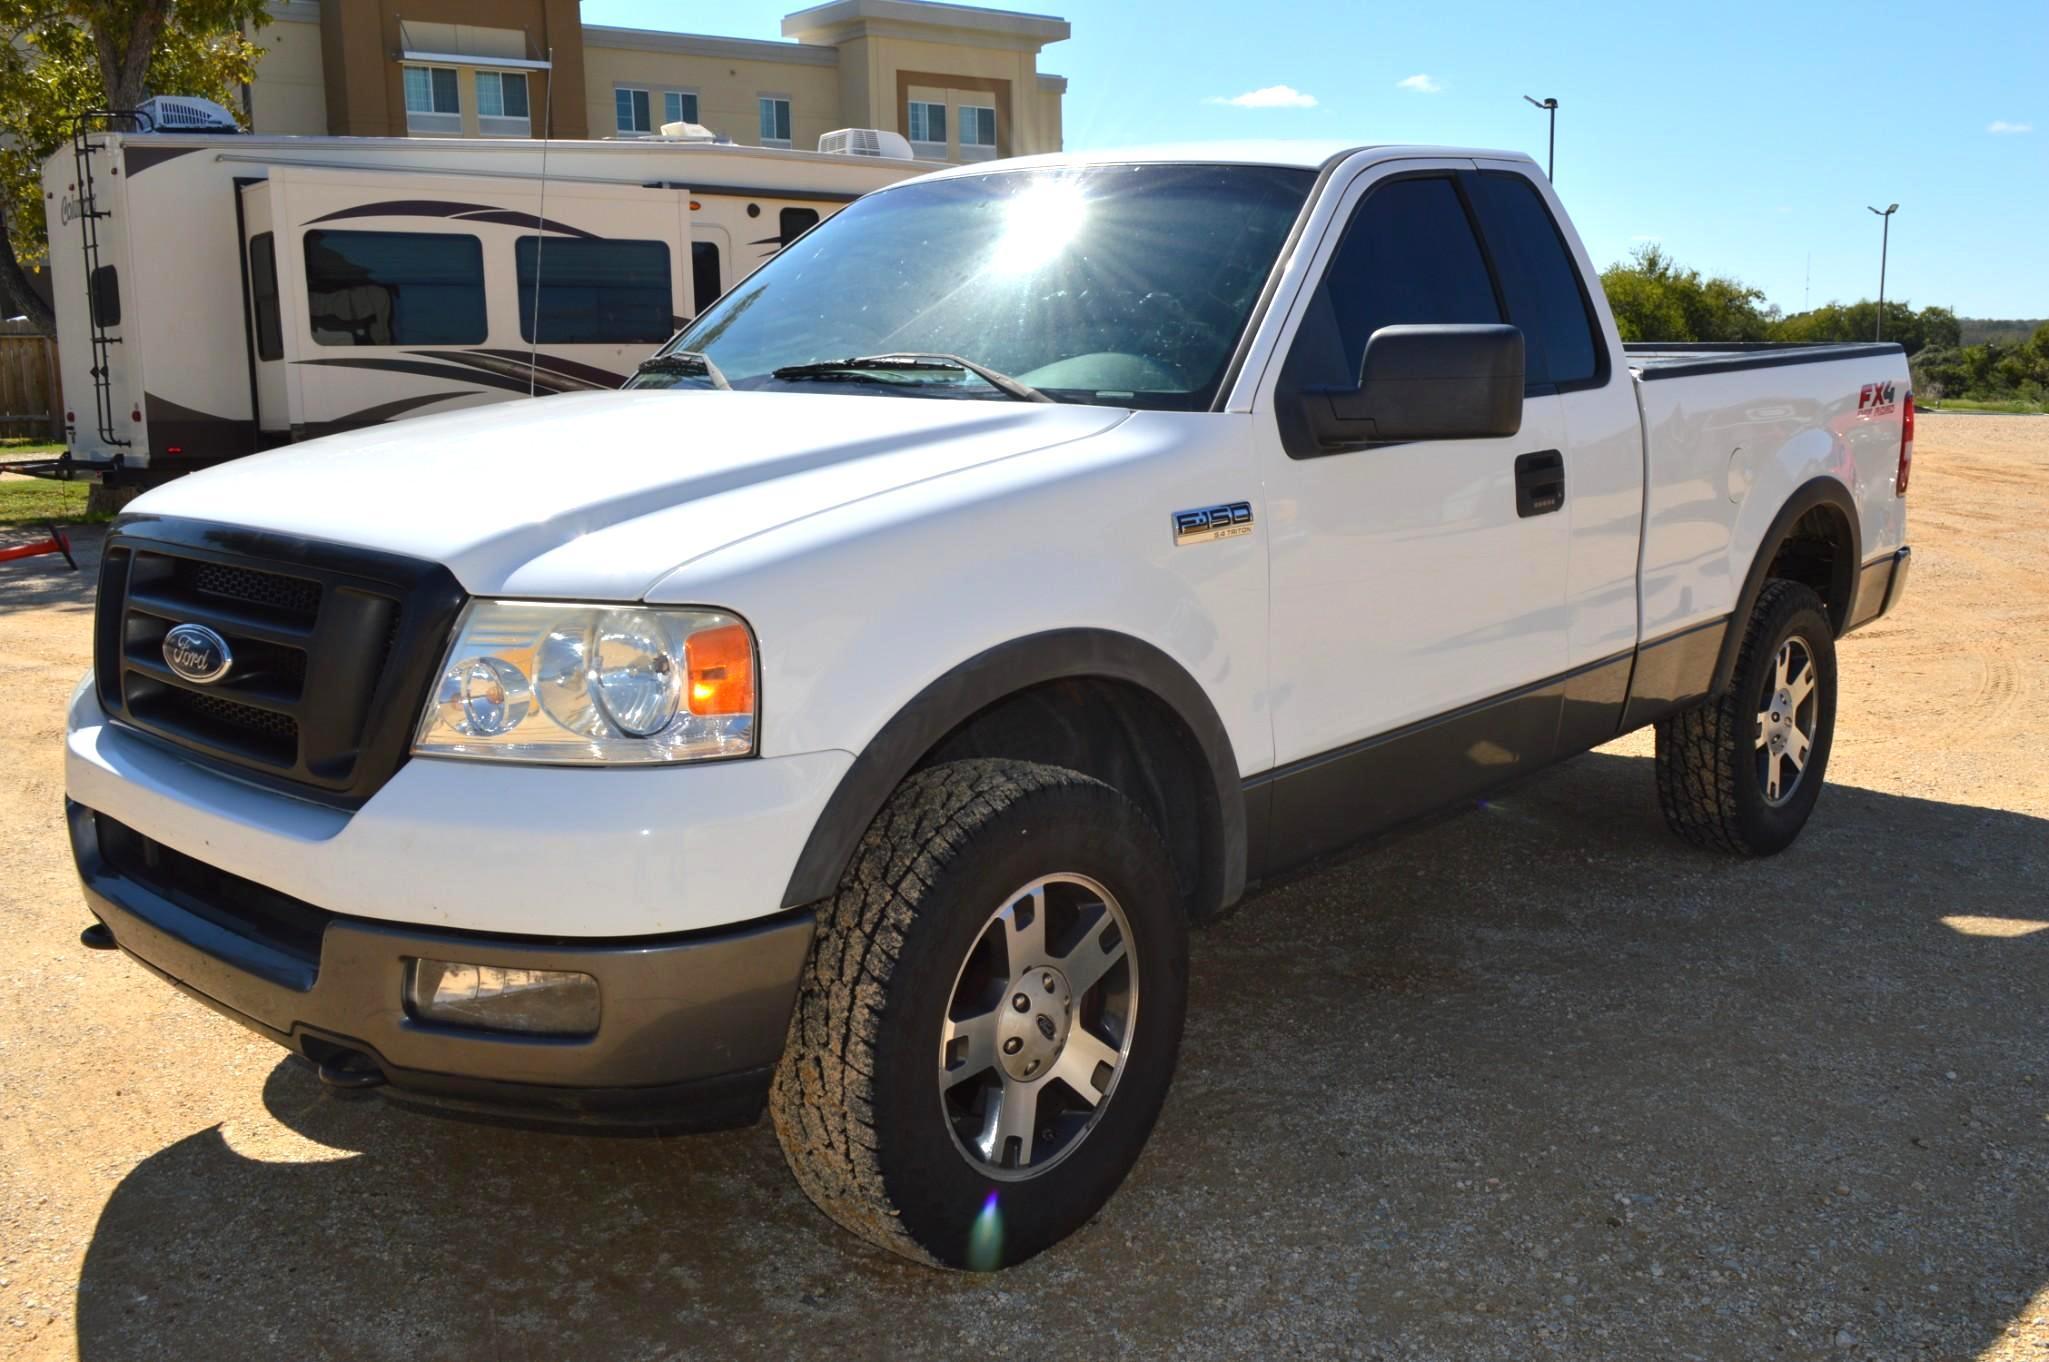 2005 Ford F-150 FX4 Pickup Truck Extended Cab, 4WD, V8, Gas, Automatic, Alarm